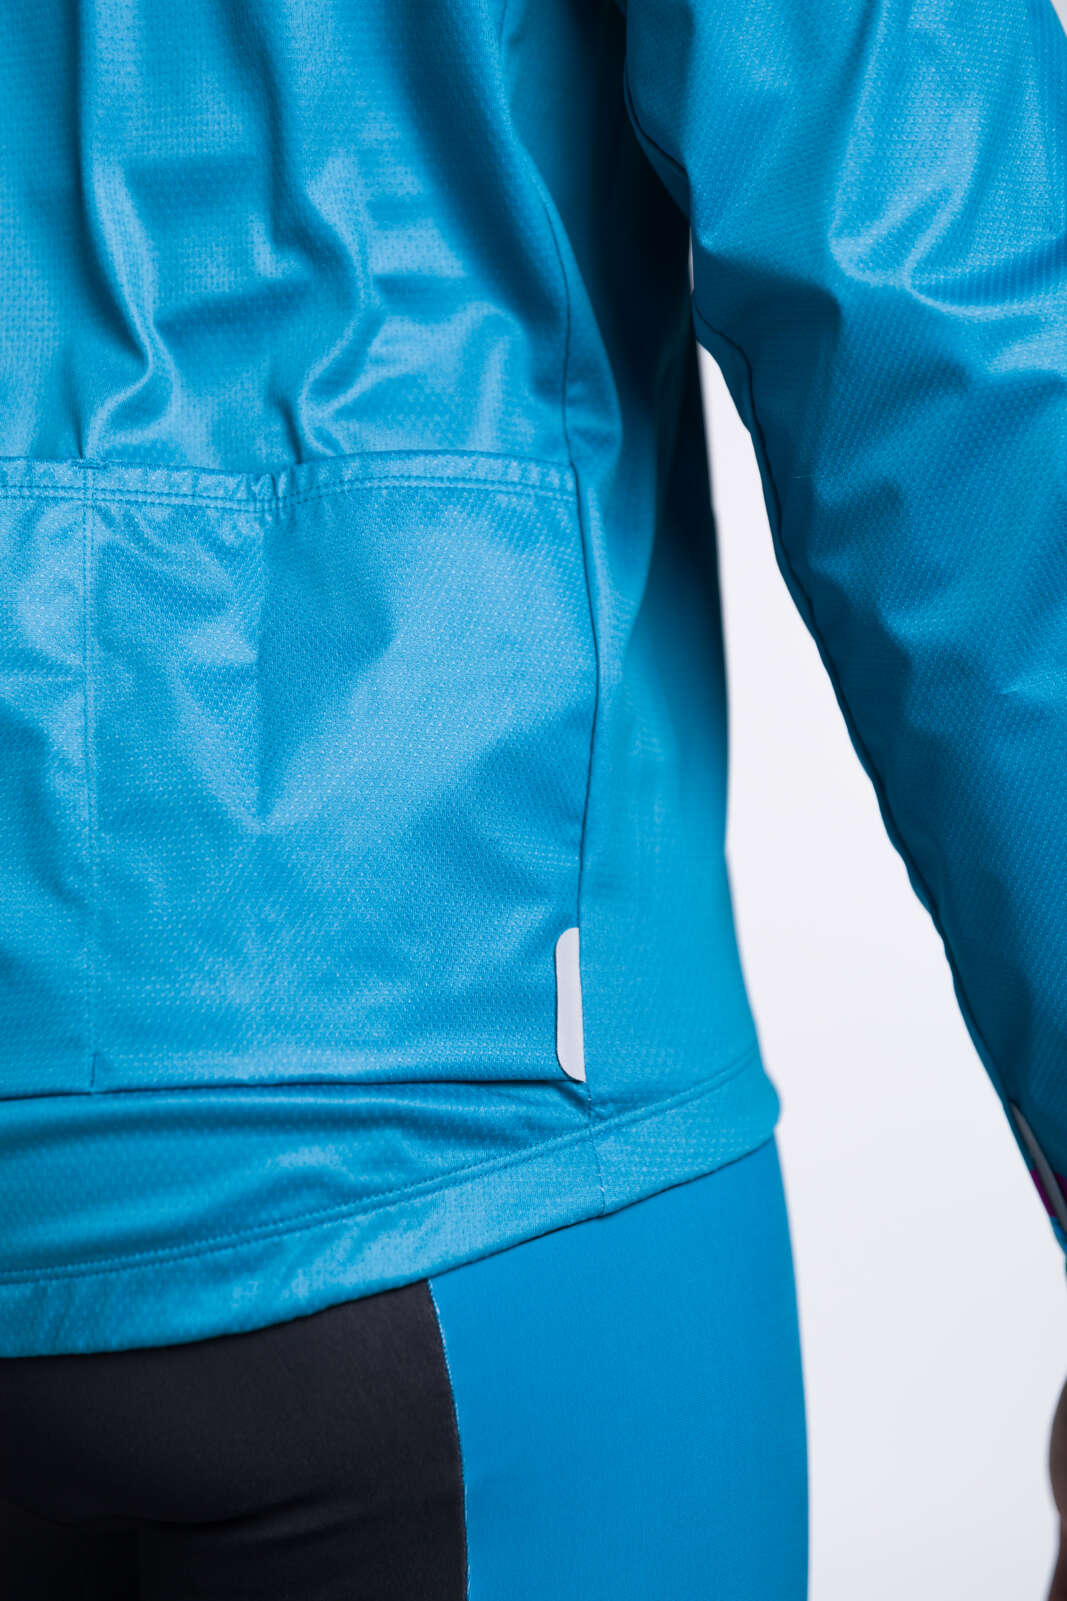 Men's Custom Cycling Jacket for Cold Weather - Breckenridge Pocket Reflective Detail